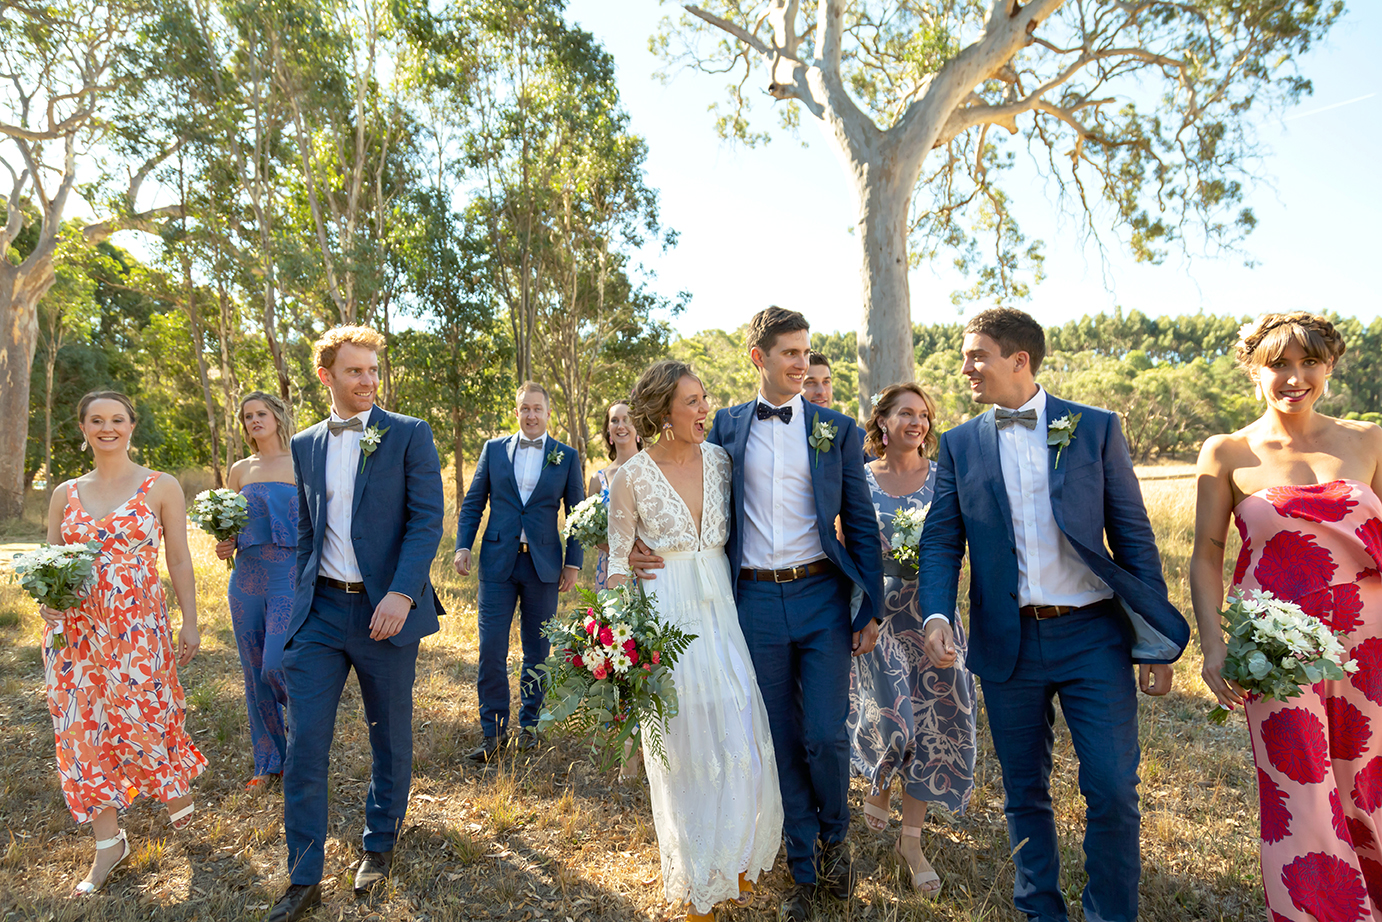 Fleurieu Cherries is a South Australian wedding and event venue set within the McLaren Vale Wine region, just behind Willunga.